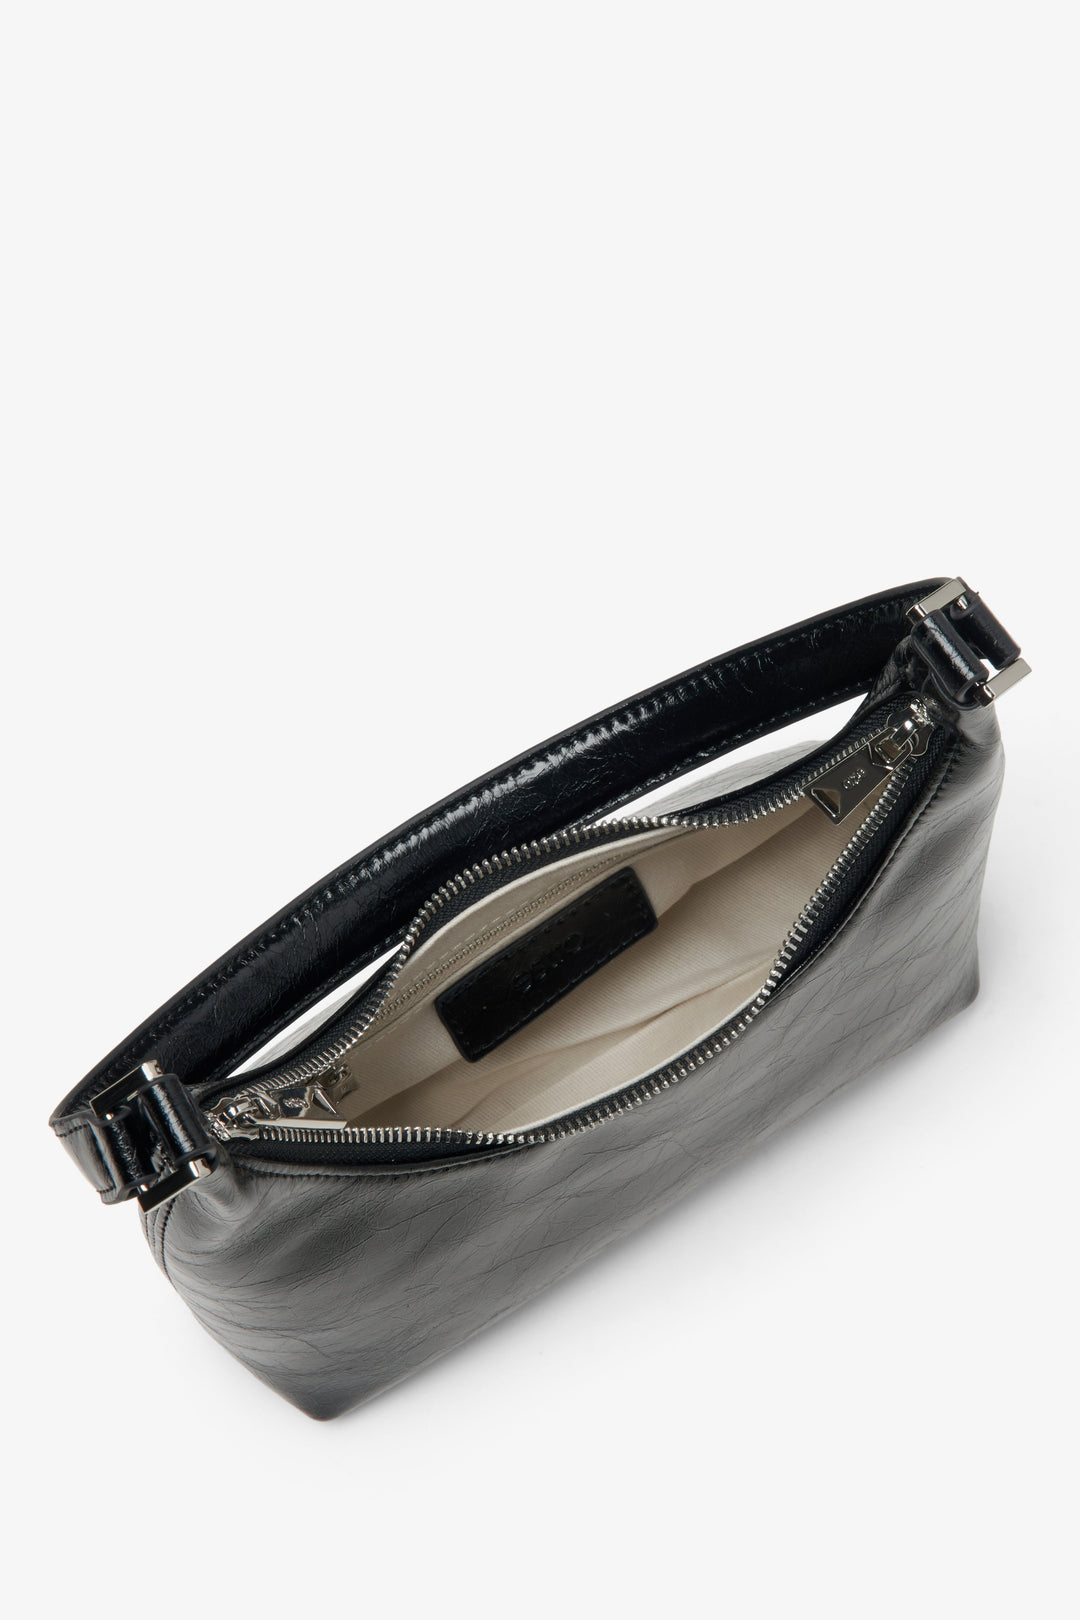 Eclectic women's black patent leather handbag - a close-up on the main compartment.